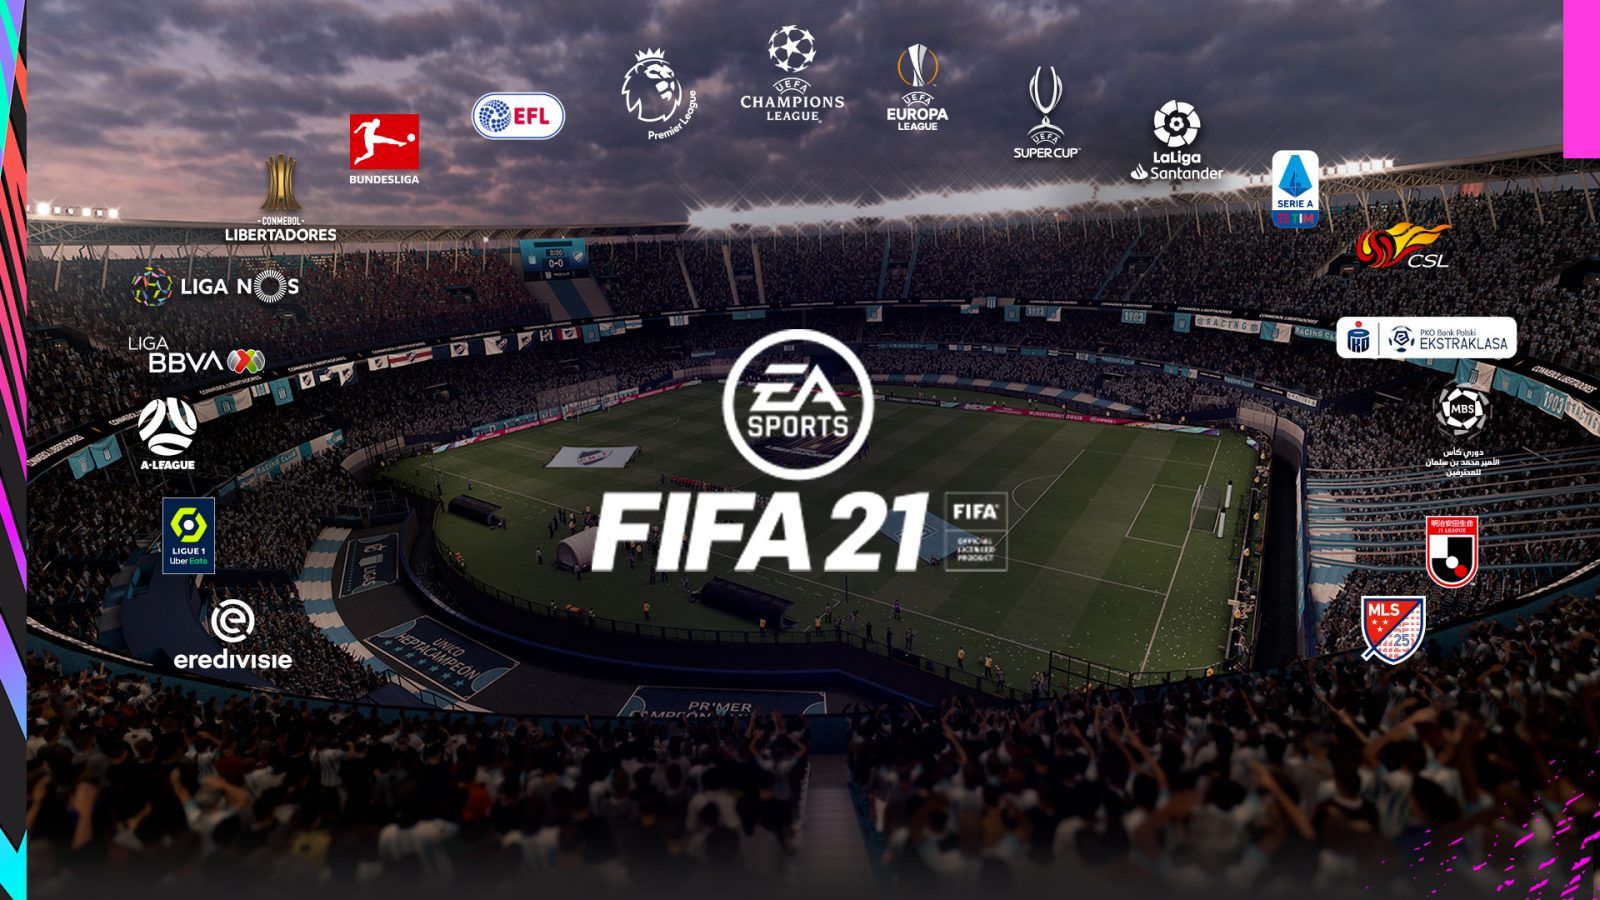 FIFA 21 launches October 9 with updated career mode, more